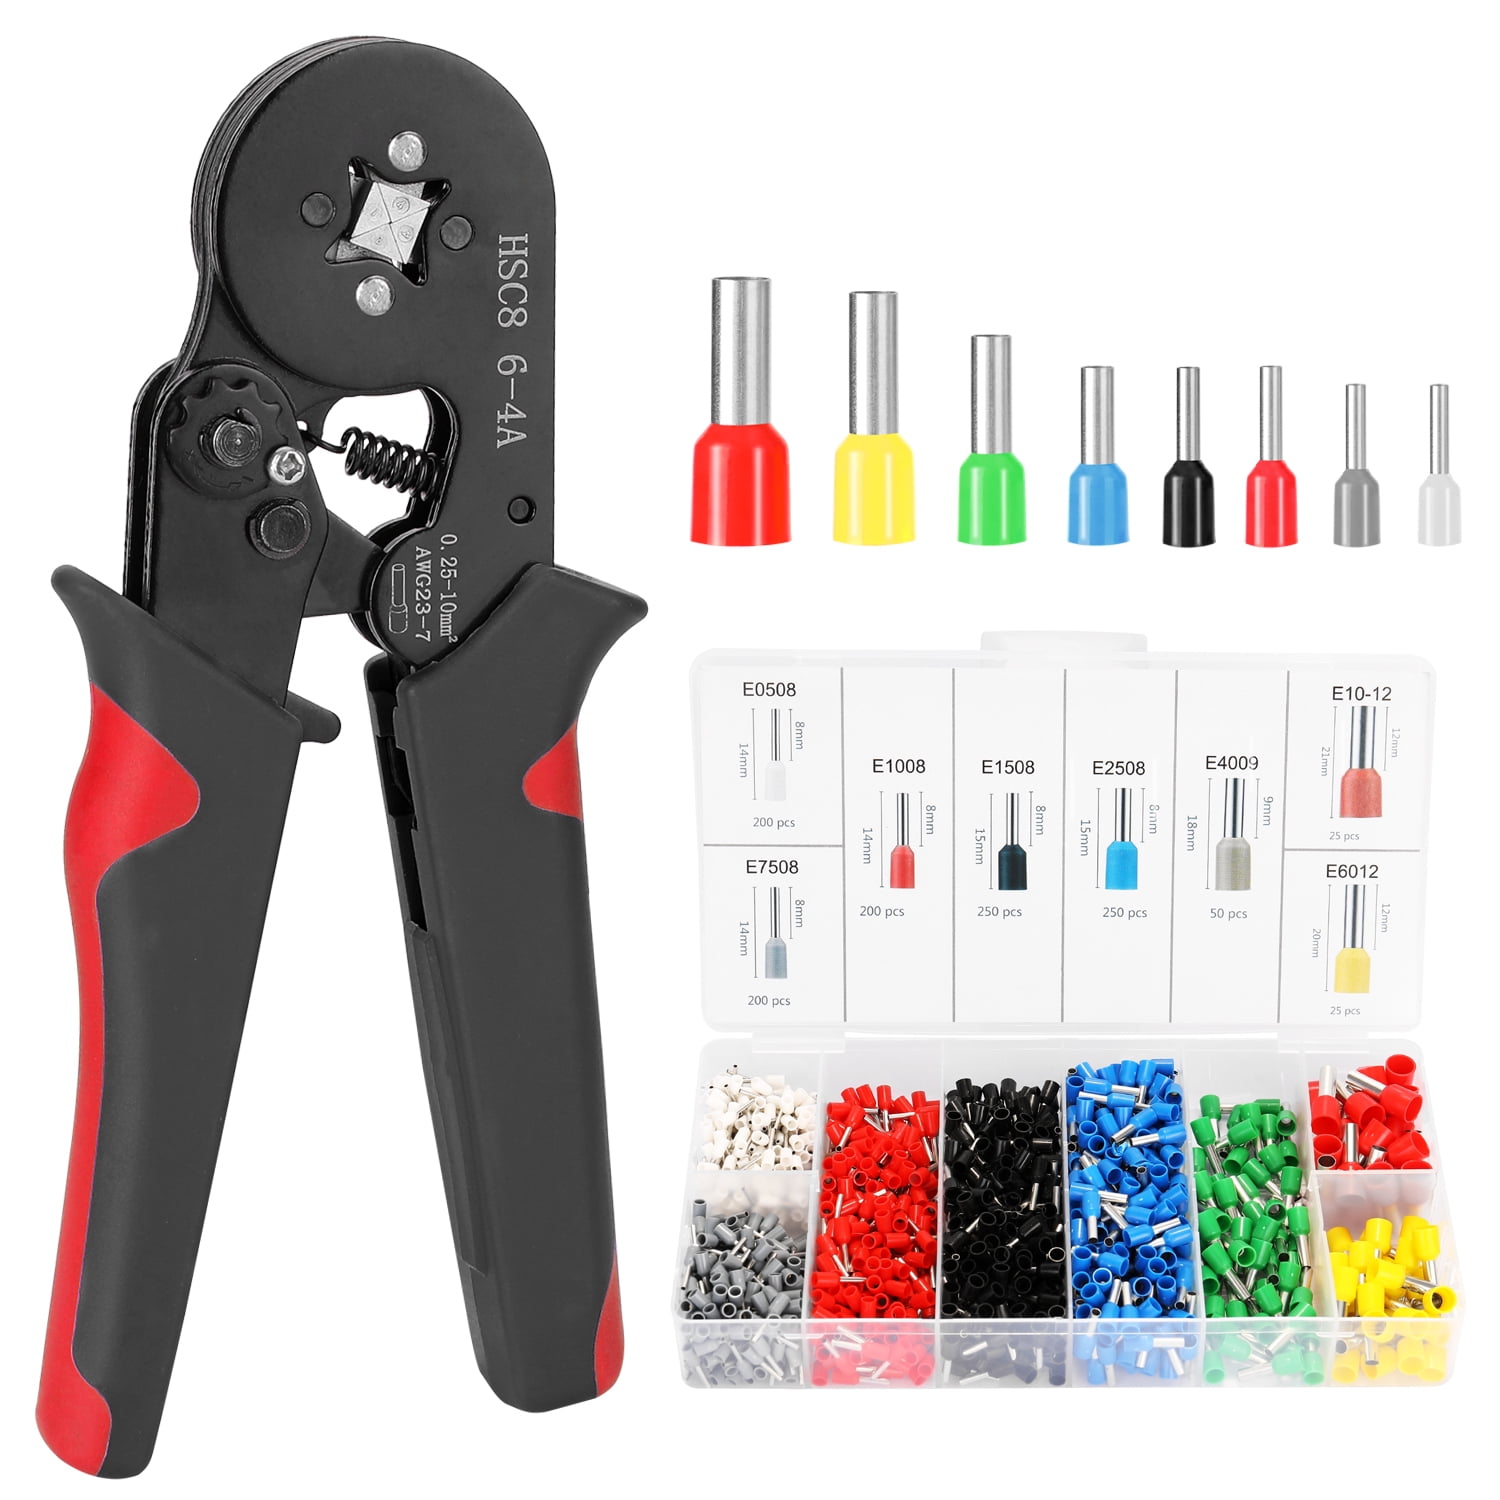 0.25-10mm Crimper plier wire crimping tool with 1200PCS wire crimping terminal S 